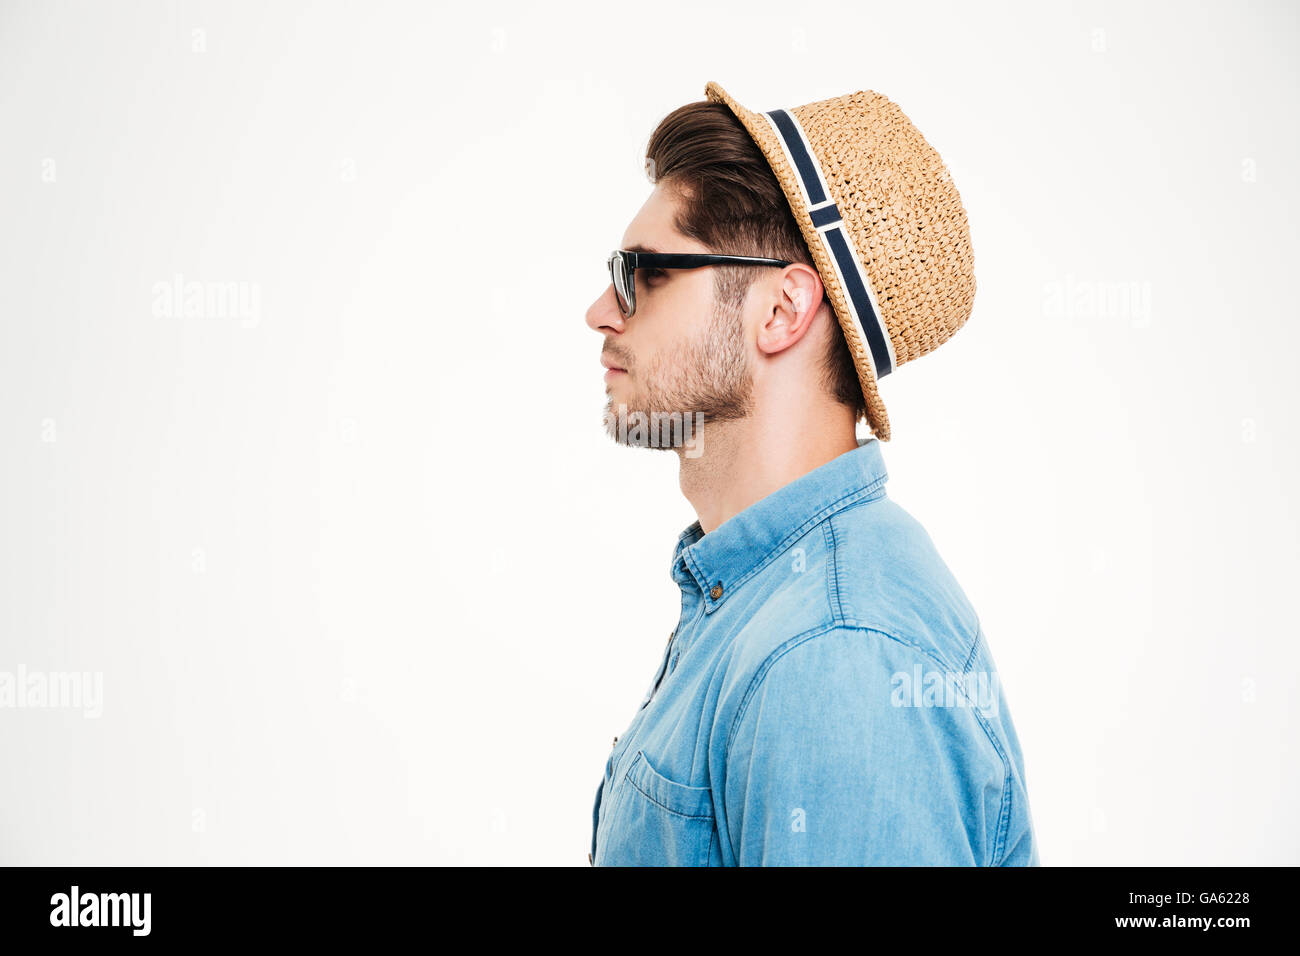 Profile of serious young man in blue shirt, hat and sunglasses over white background Stock Photo